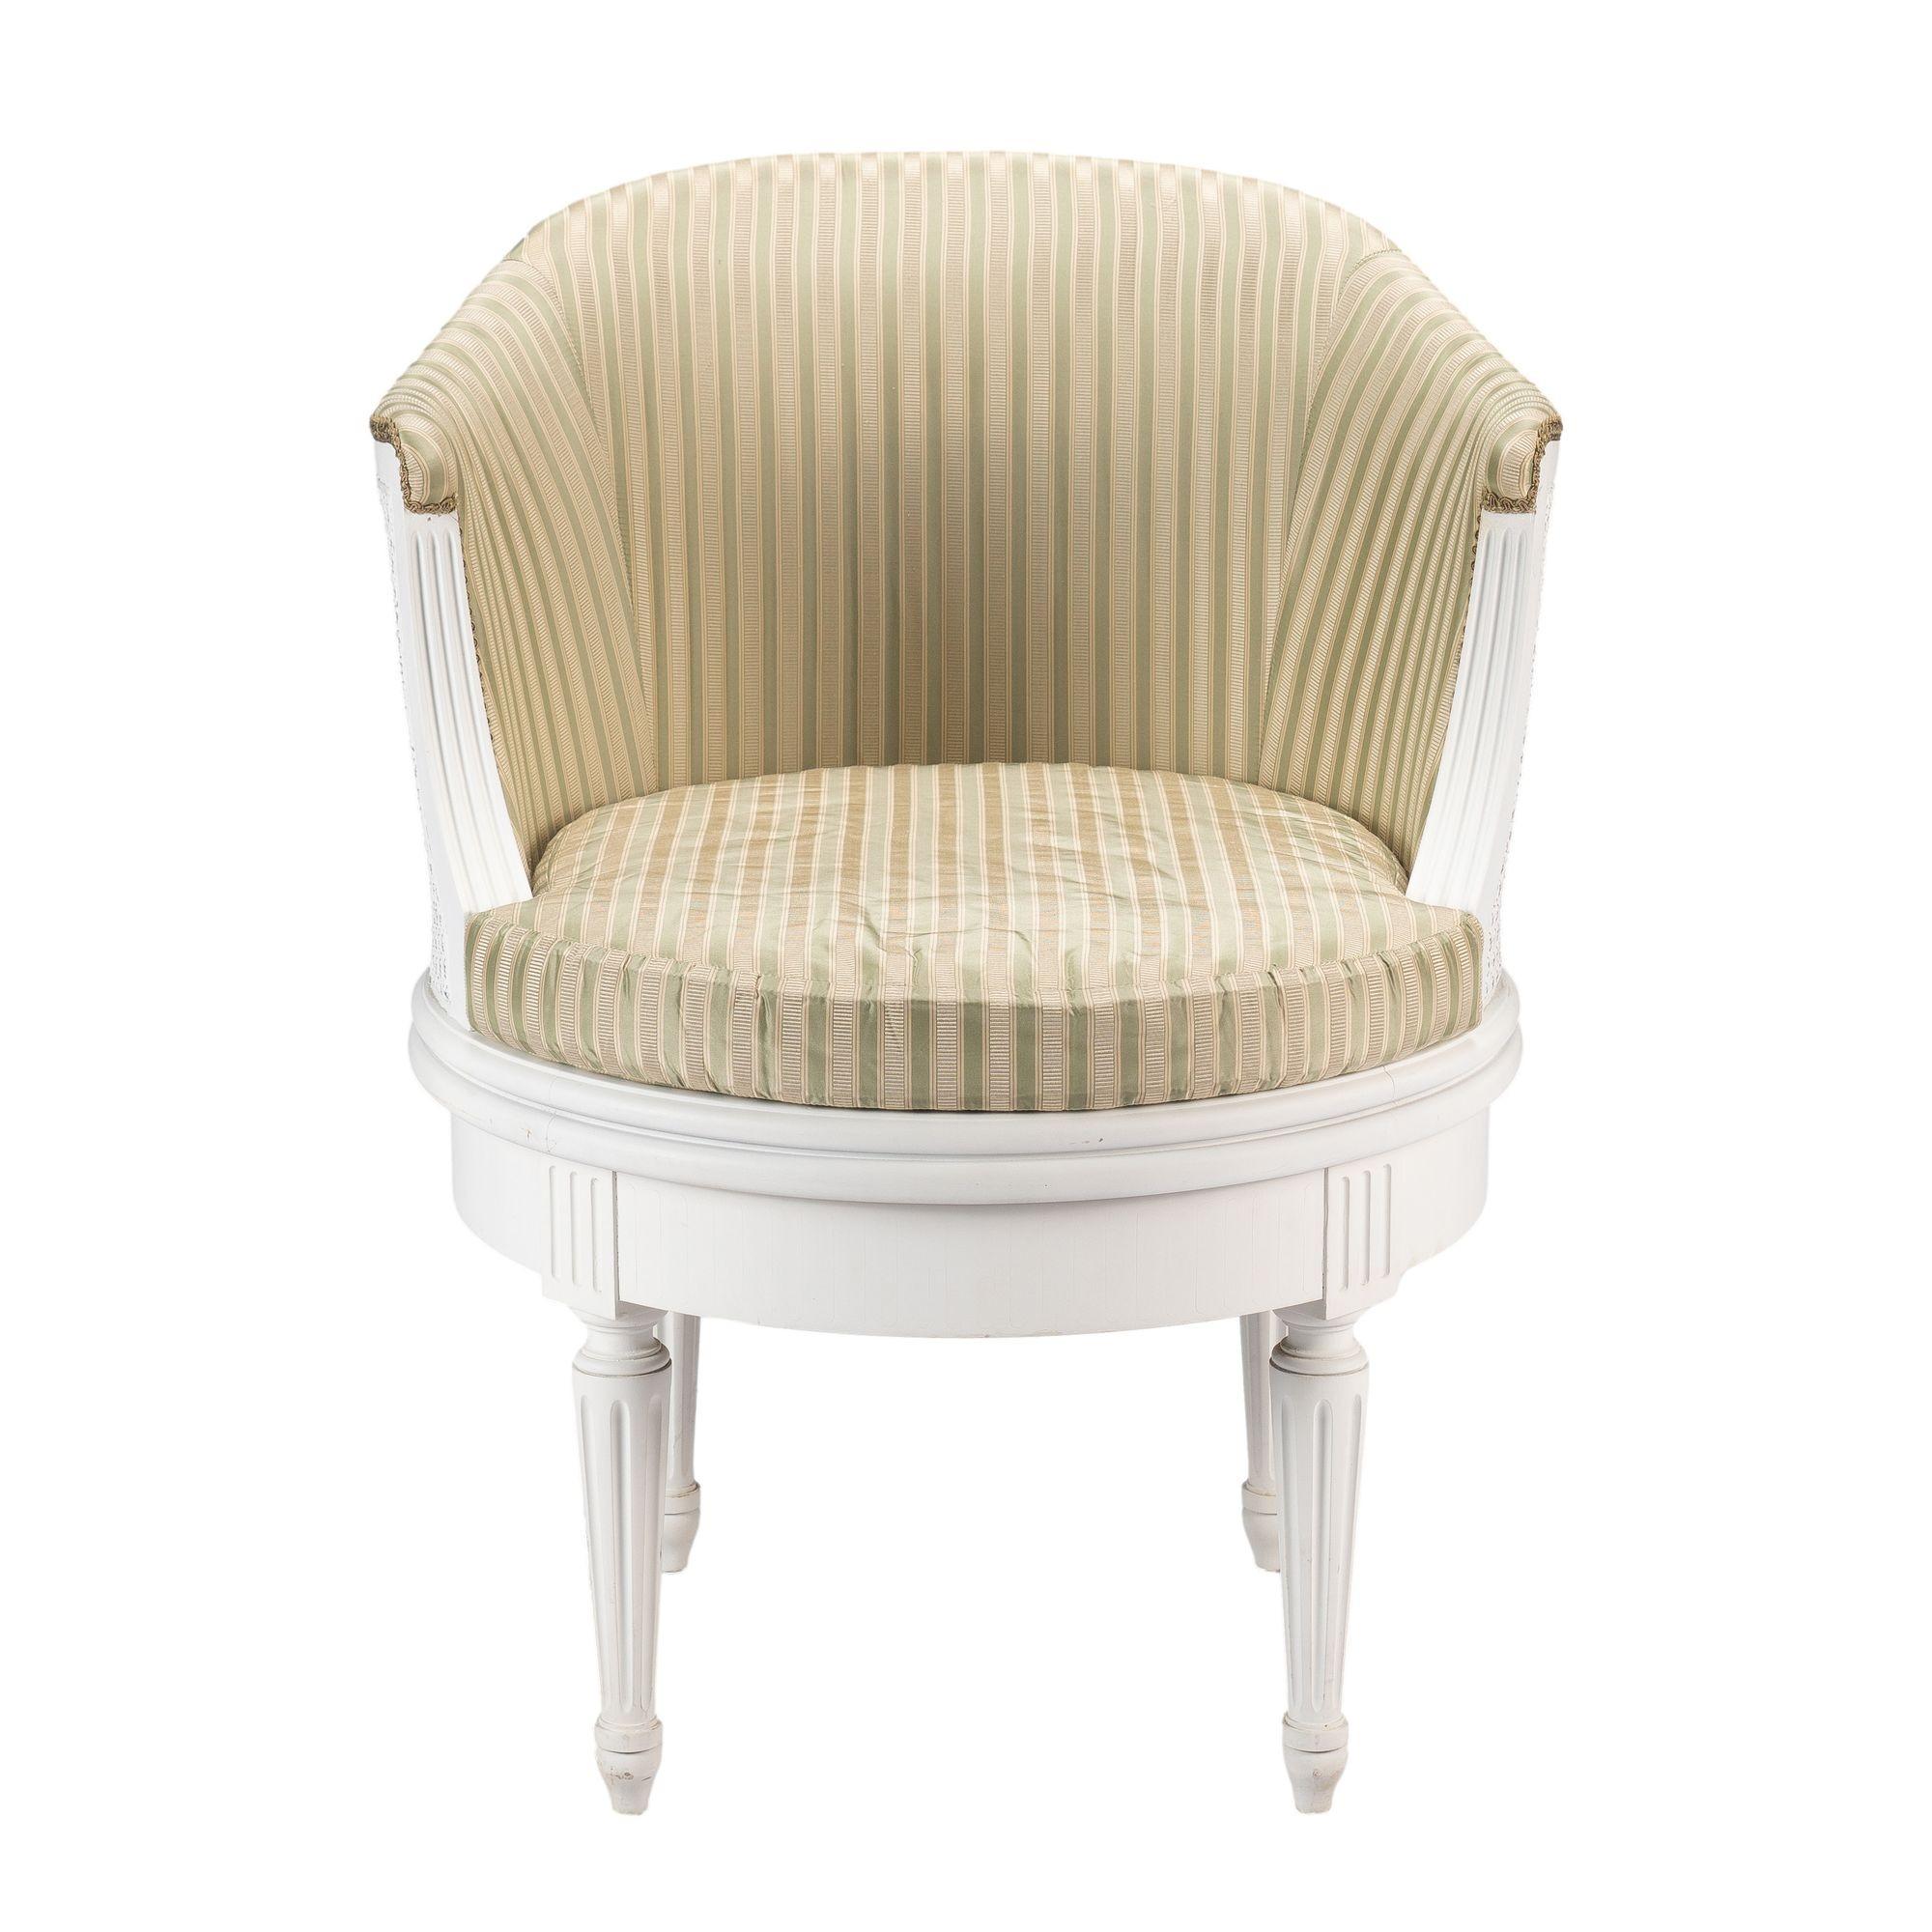 Painted swivel chair in the Louis XVI taste. The chair has an upholstered internal back with gimp trim and a caned external frame. The seat is caned and fitted with an upholstered box cushion. The seat frame is supported by four turned and fluted